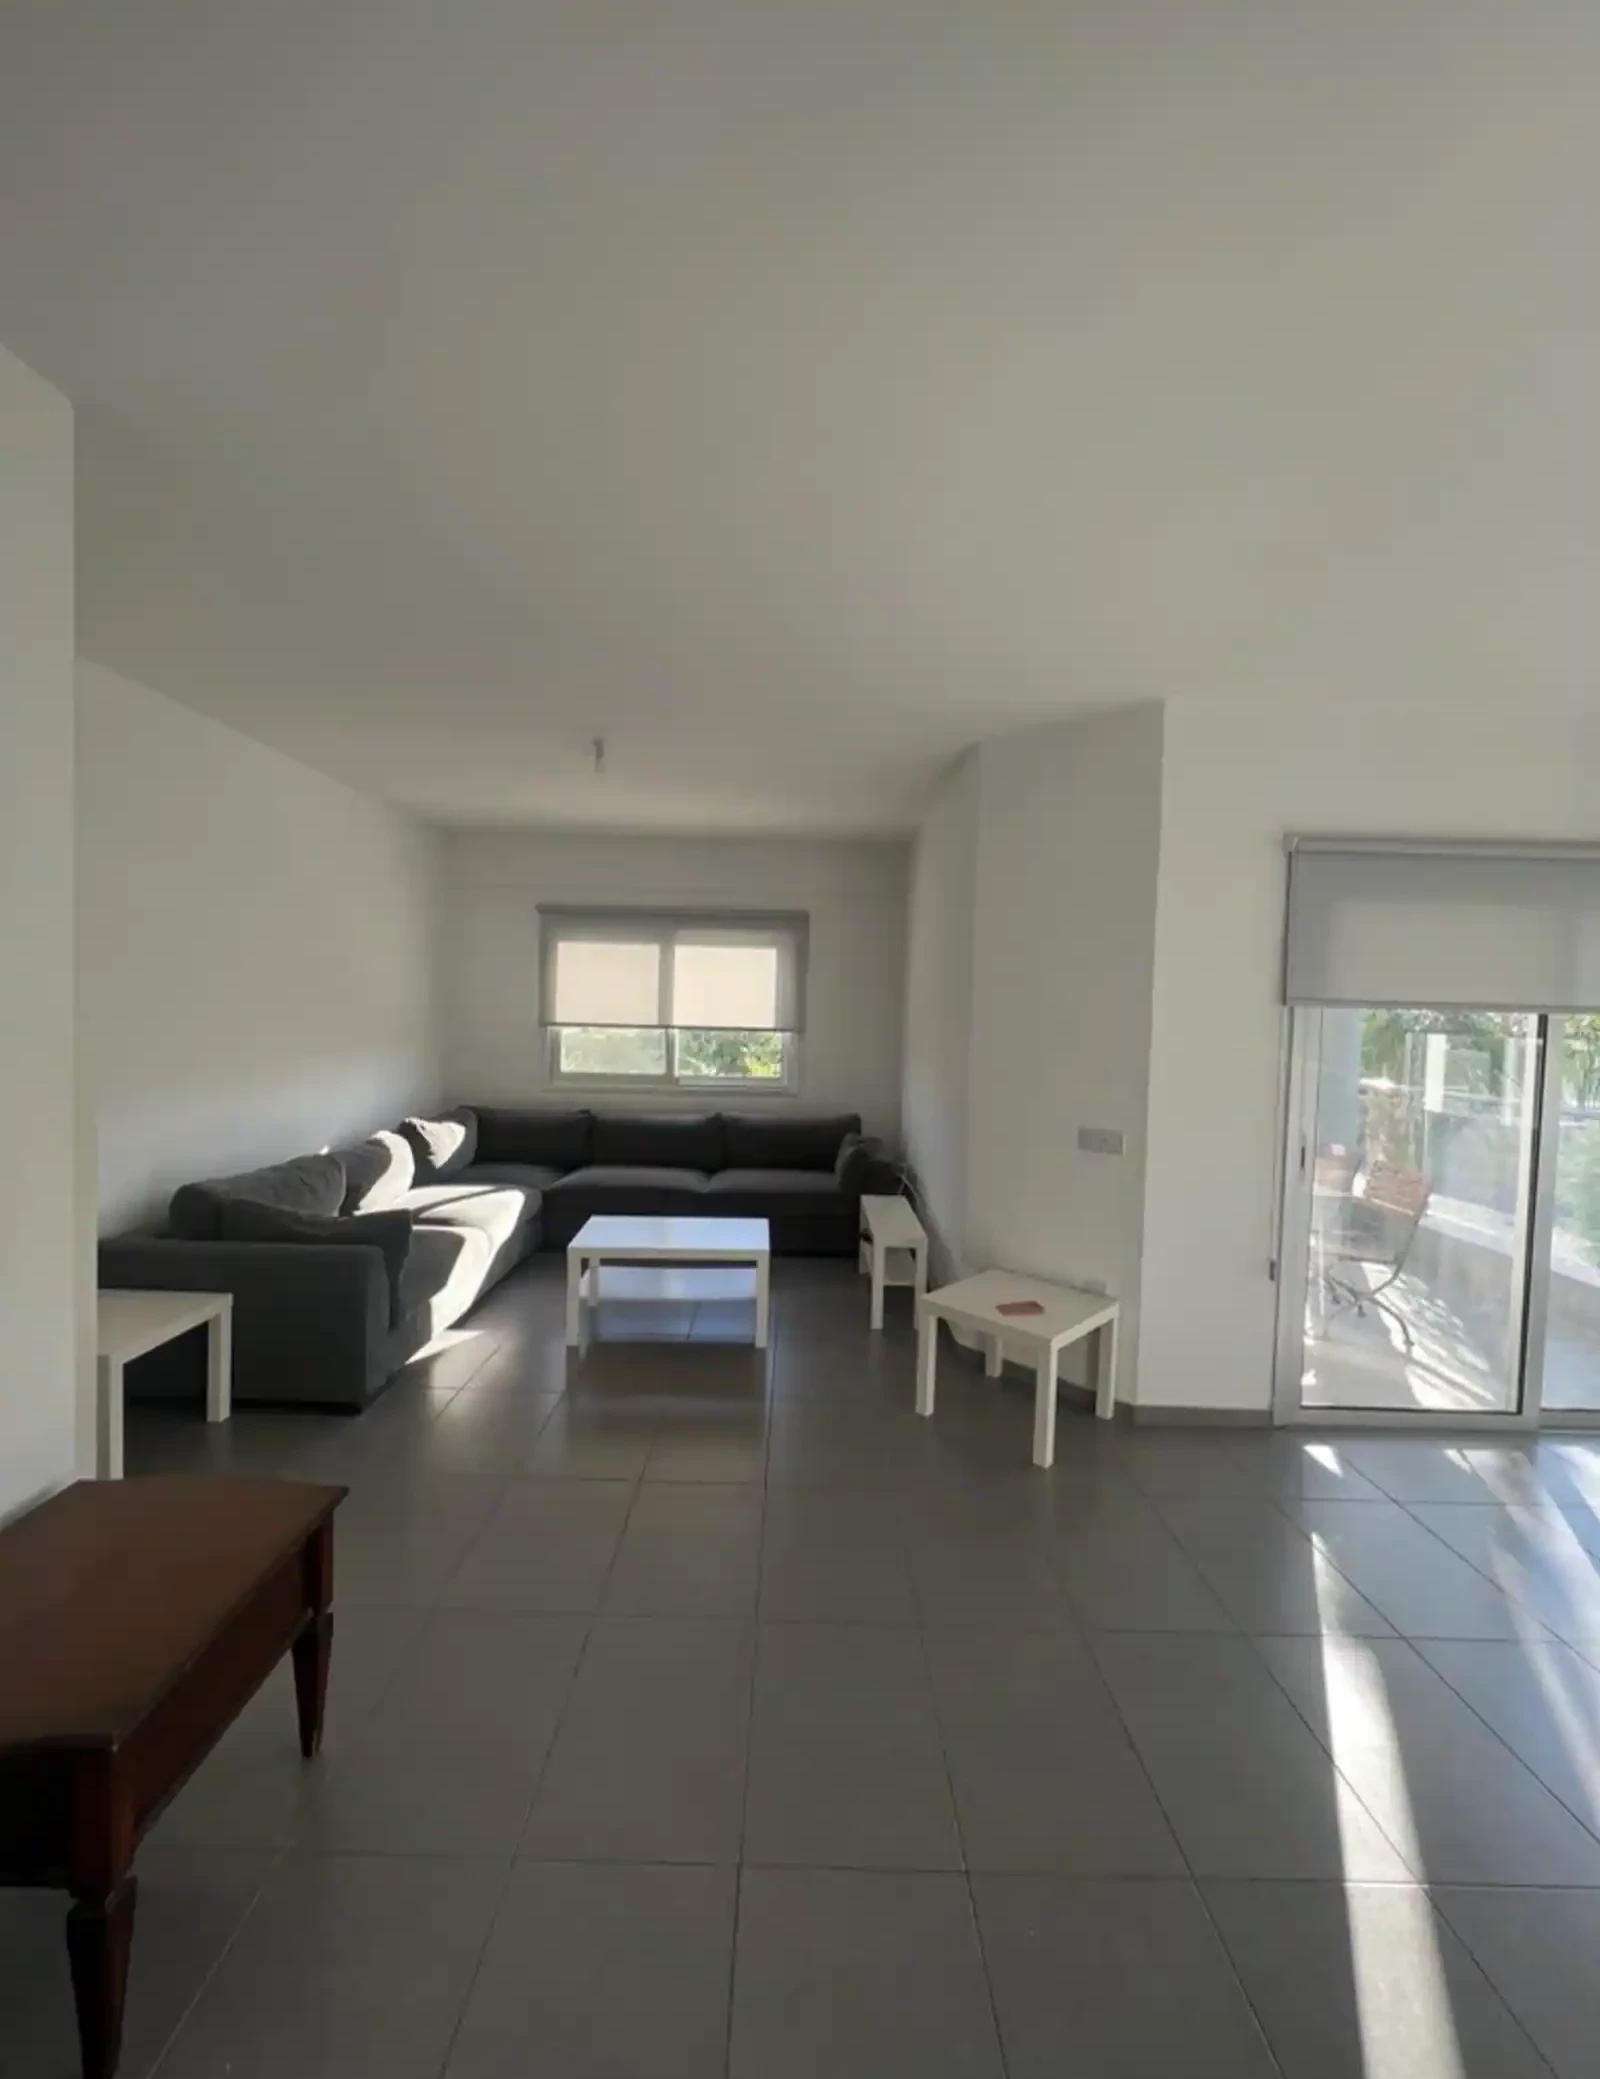 2-bedroom apartment to rent €1.050, image 1